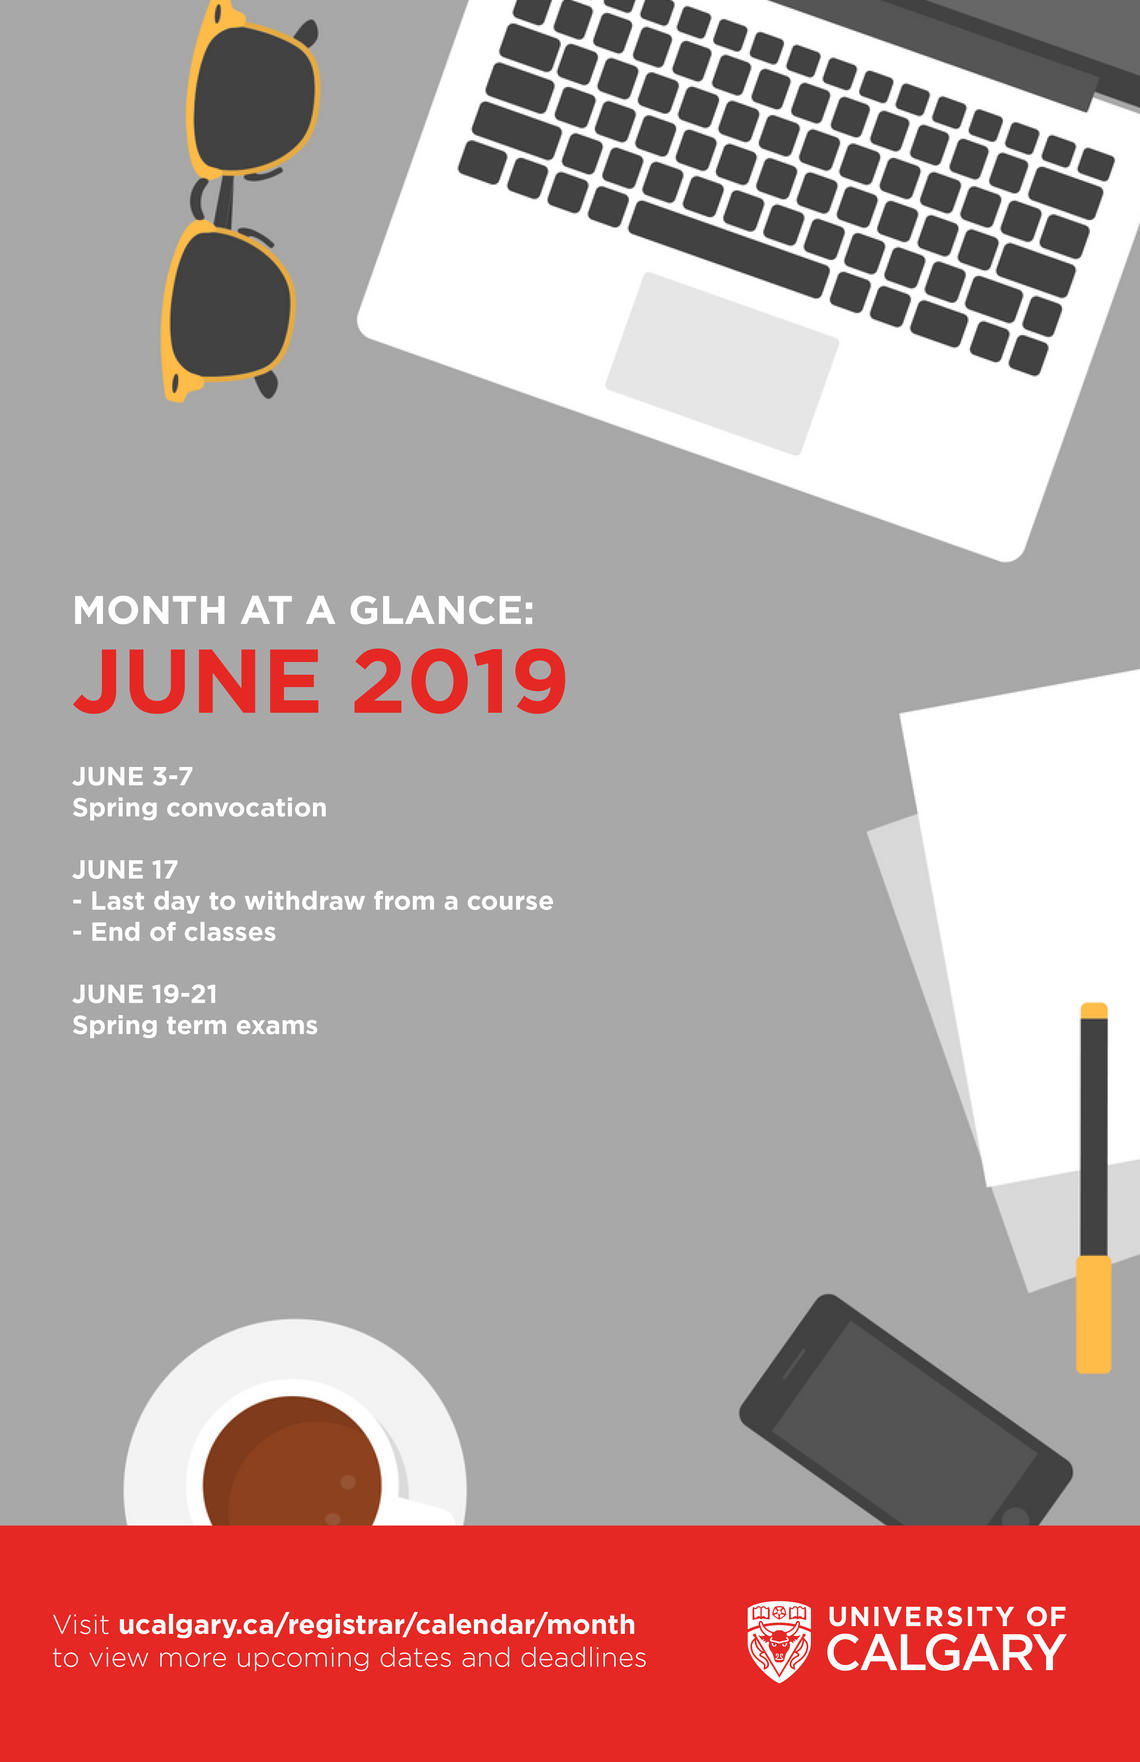 June at a glance dates for UCalgary undergraduate students